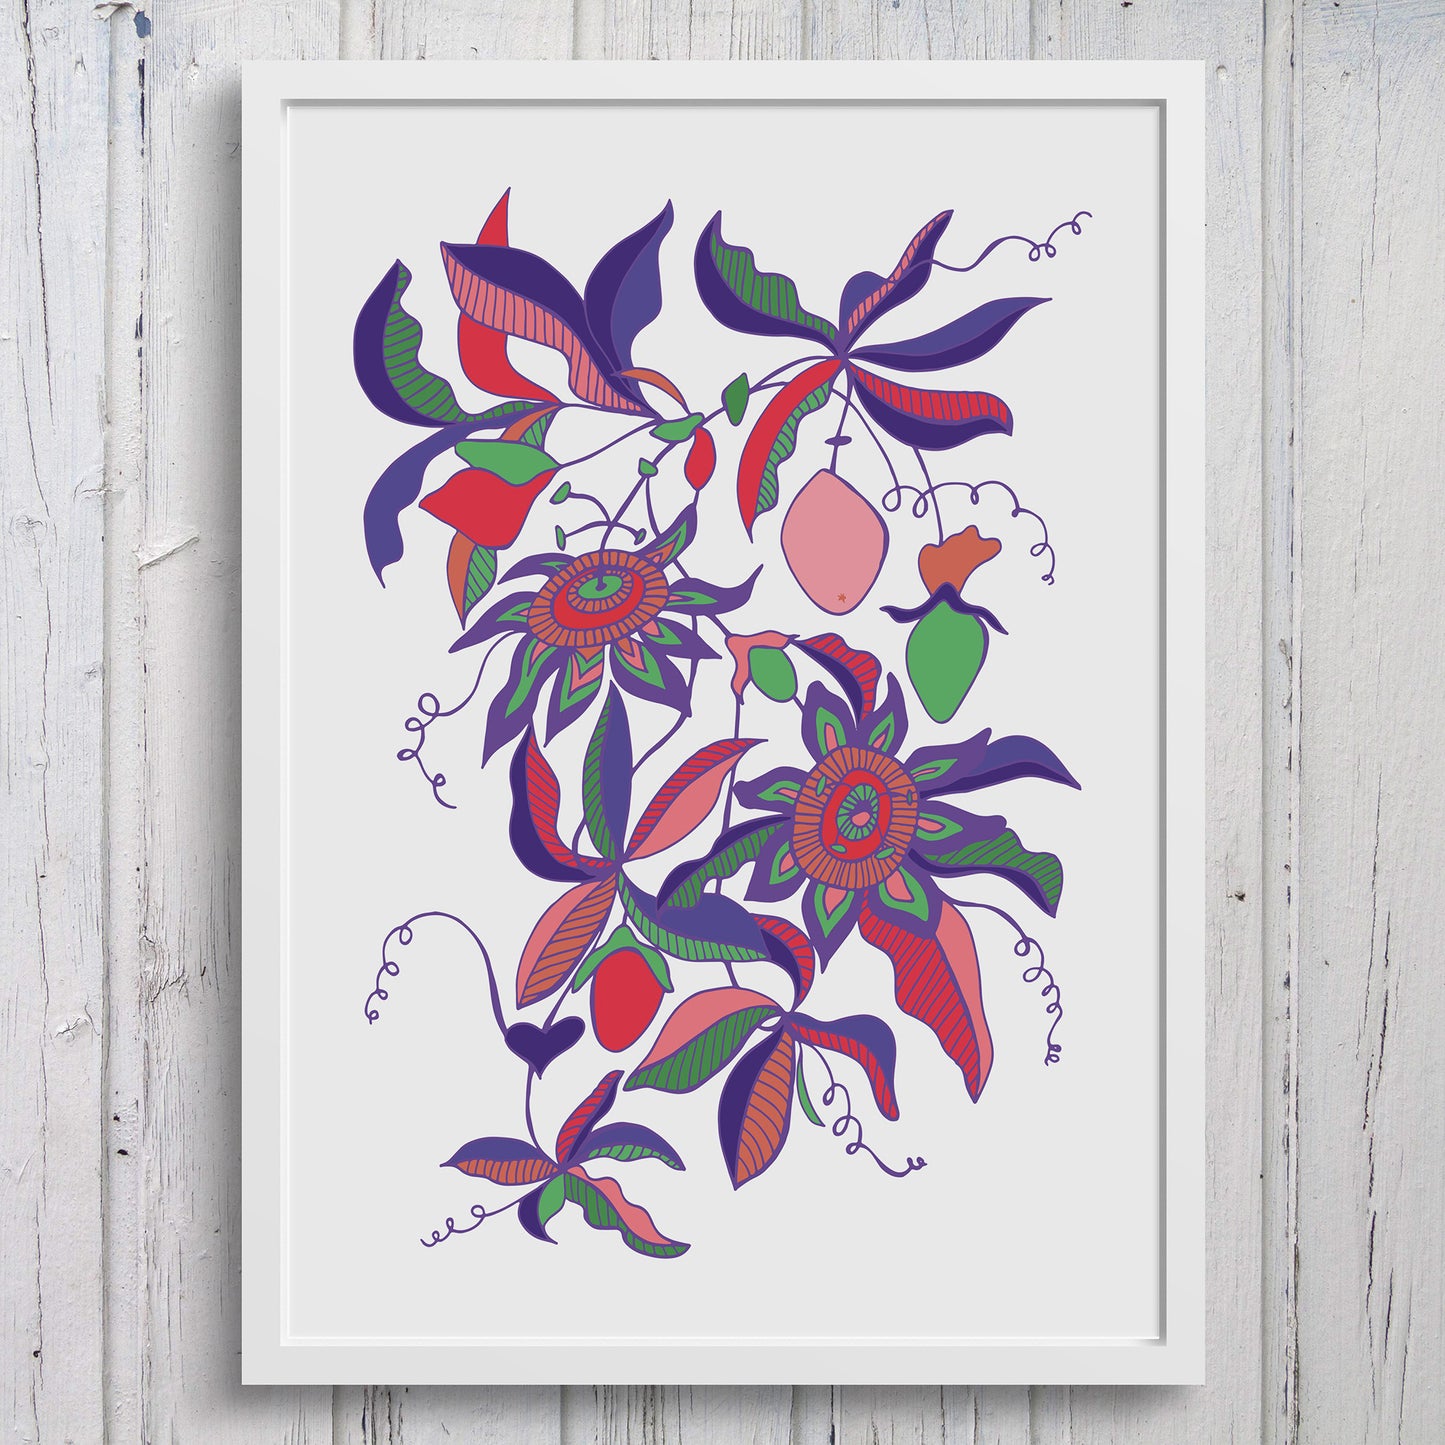 Passionflower 'Passiflora' Stylised Floral Art Print - Vibrant Maximalist - A4